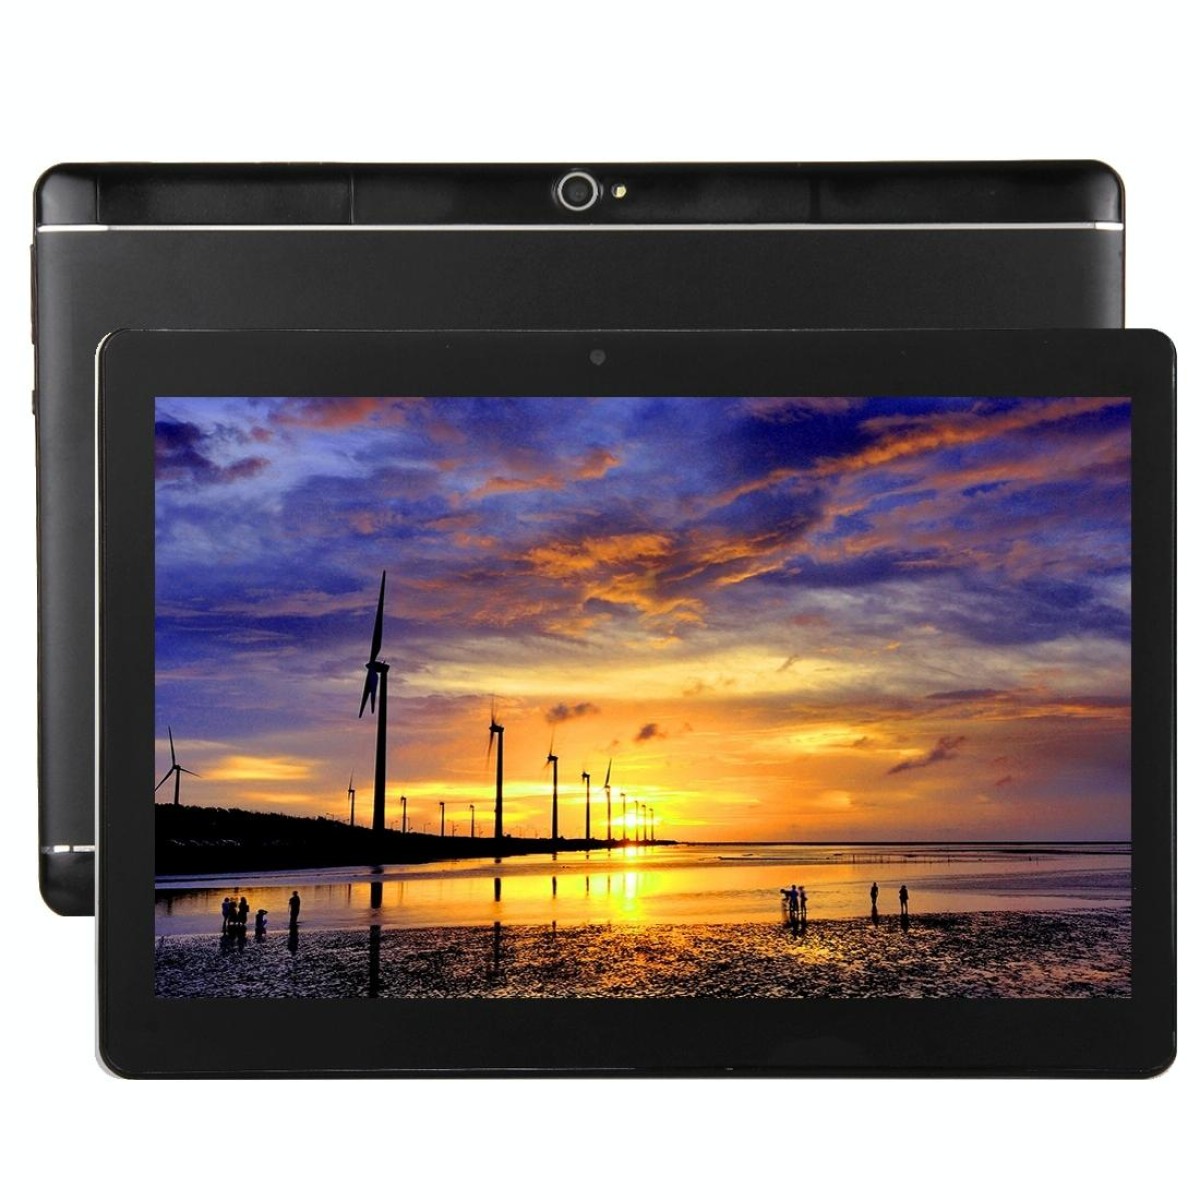 3G Phone Call Tablet PC, 10.1 inch, 2GB+32GB, Android 7.0 MTK6580 Quad Core A53 1.3GHz,  OTG, WiFi, Bluetooth, GPS(Black)